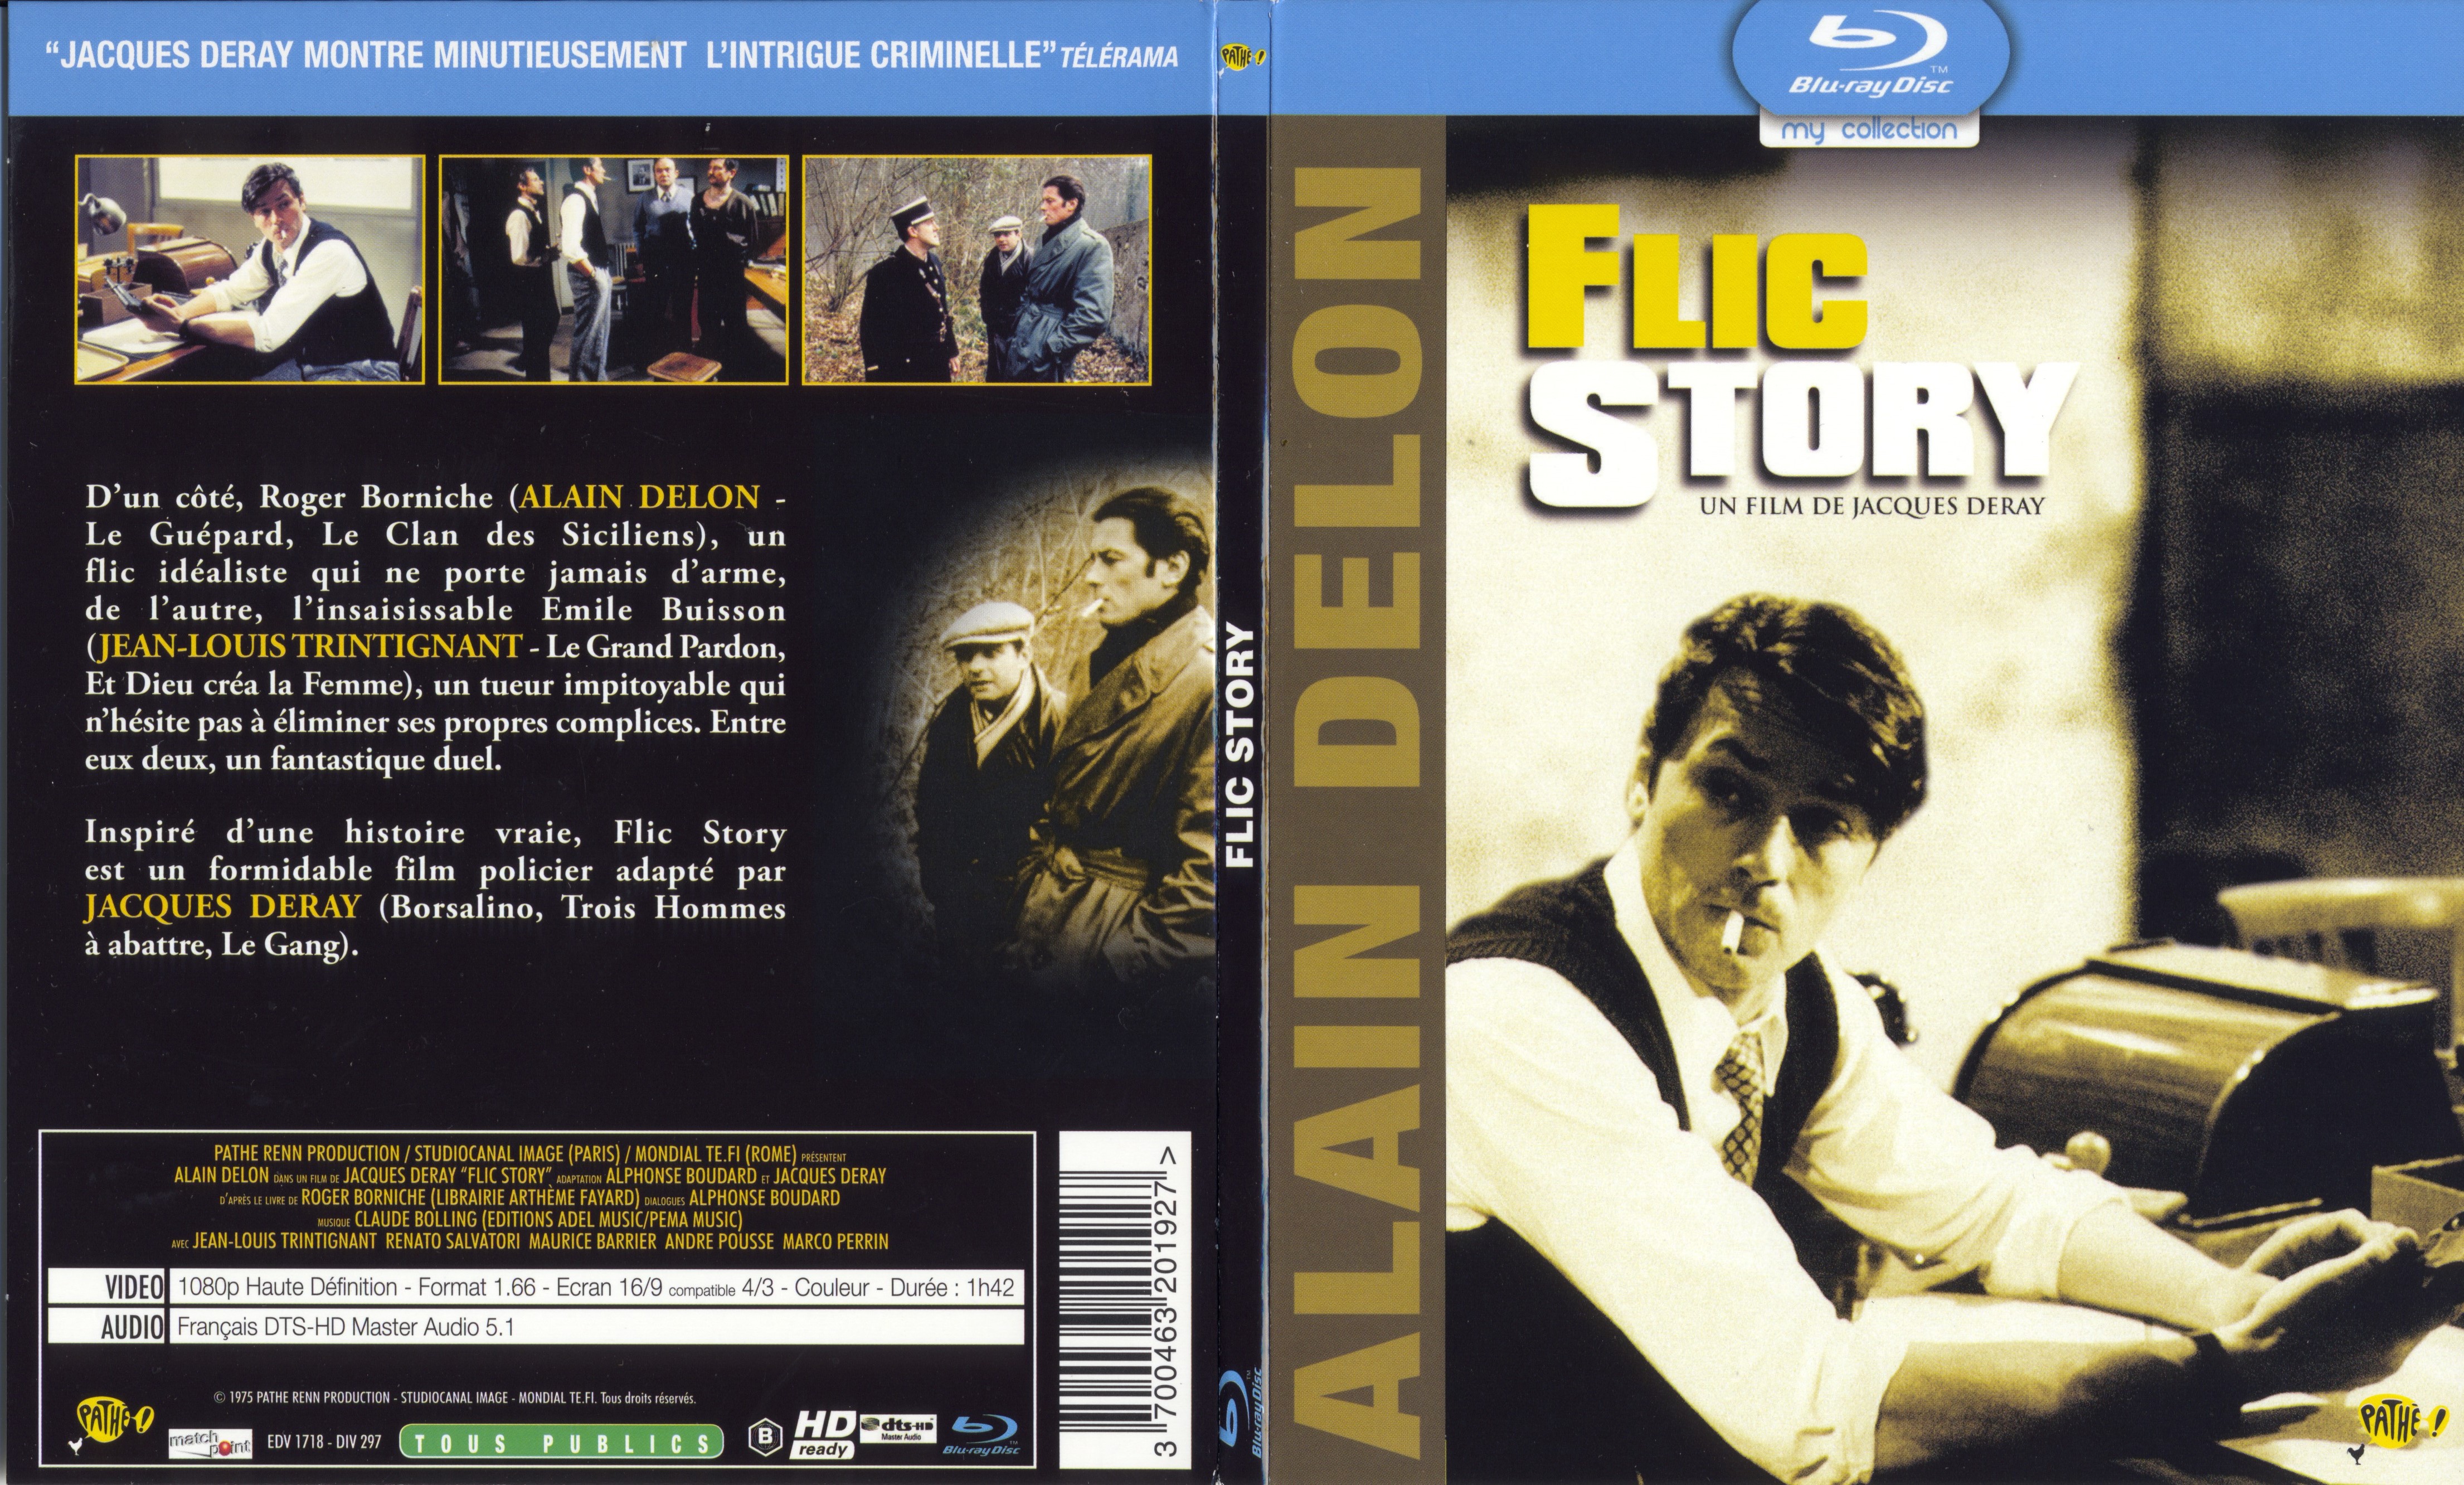 Jaquette DVD Flic Story (BLU-RAY)